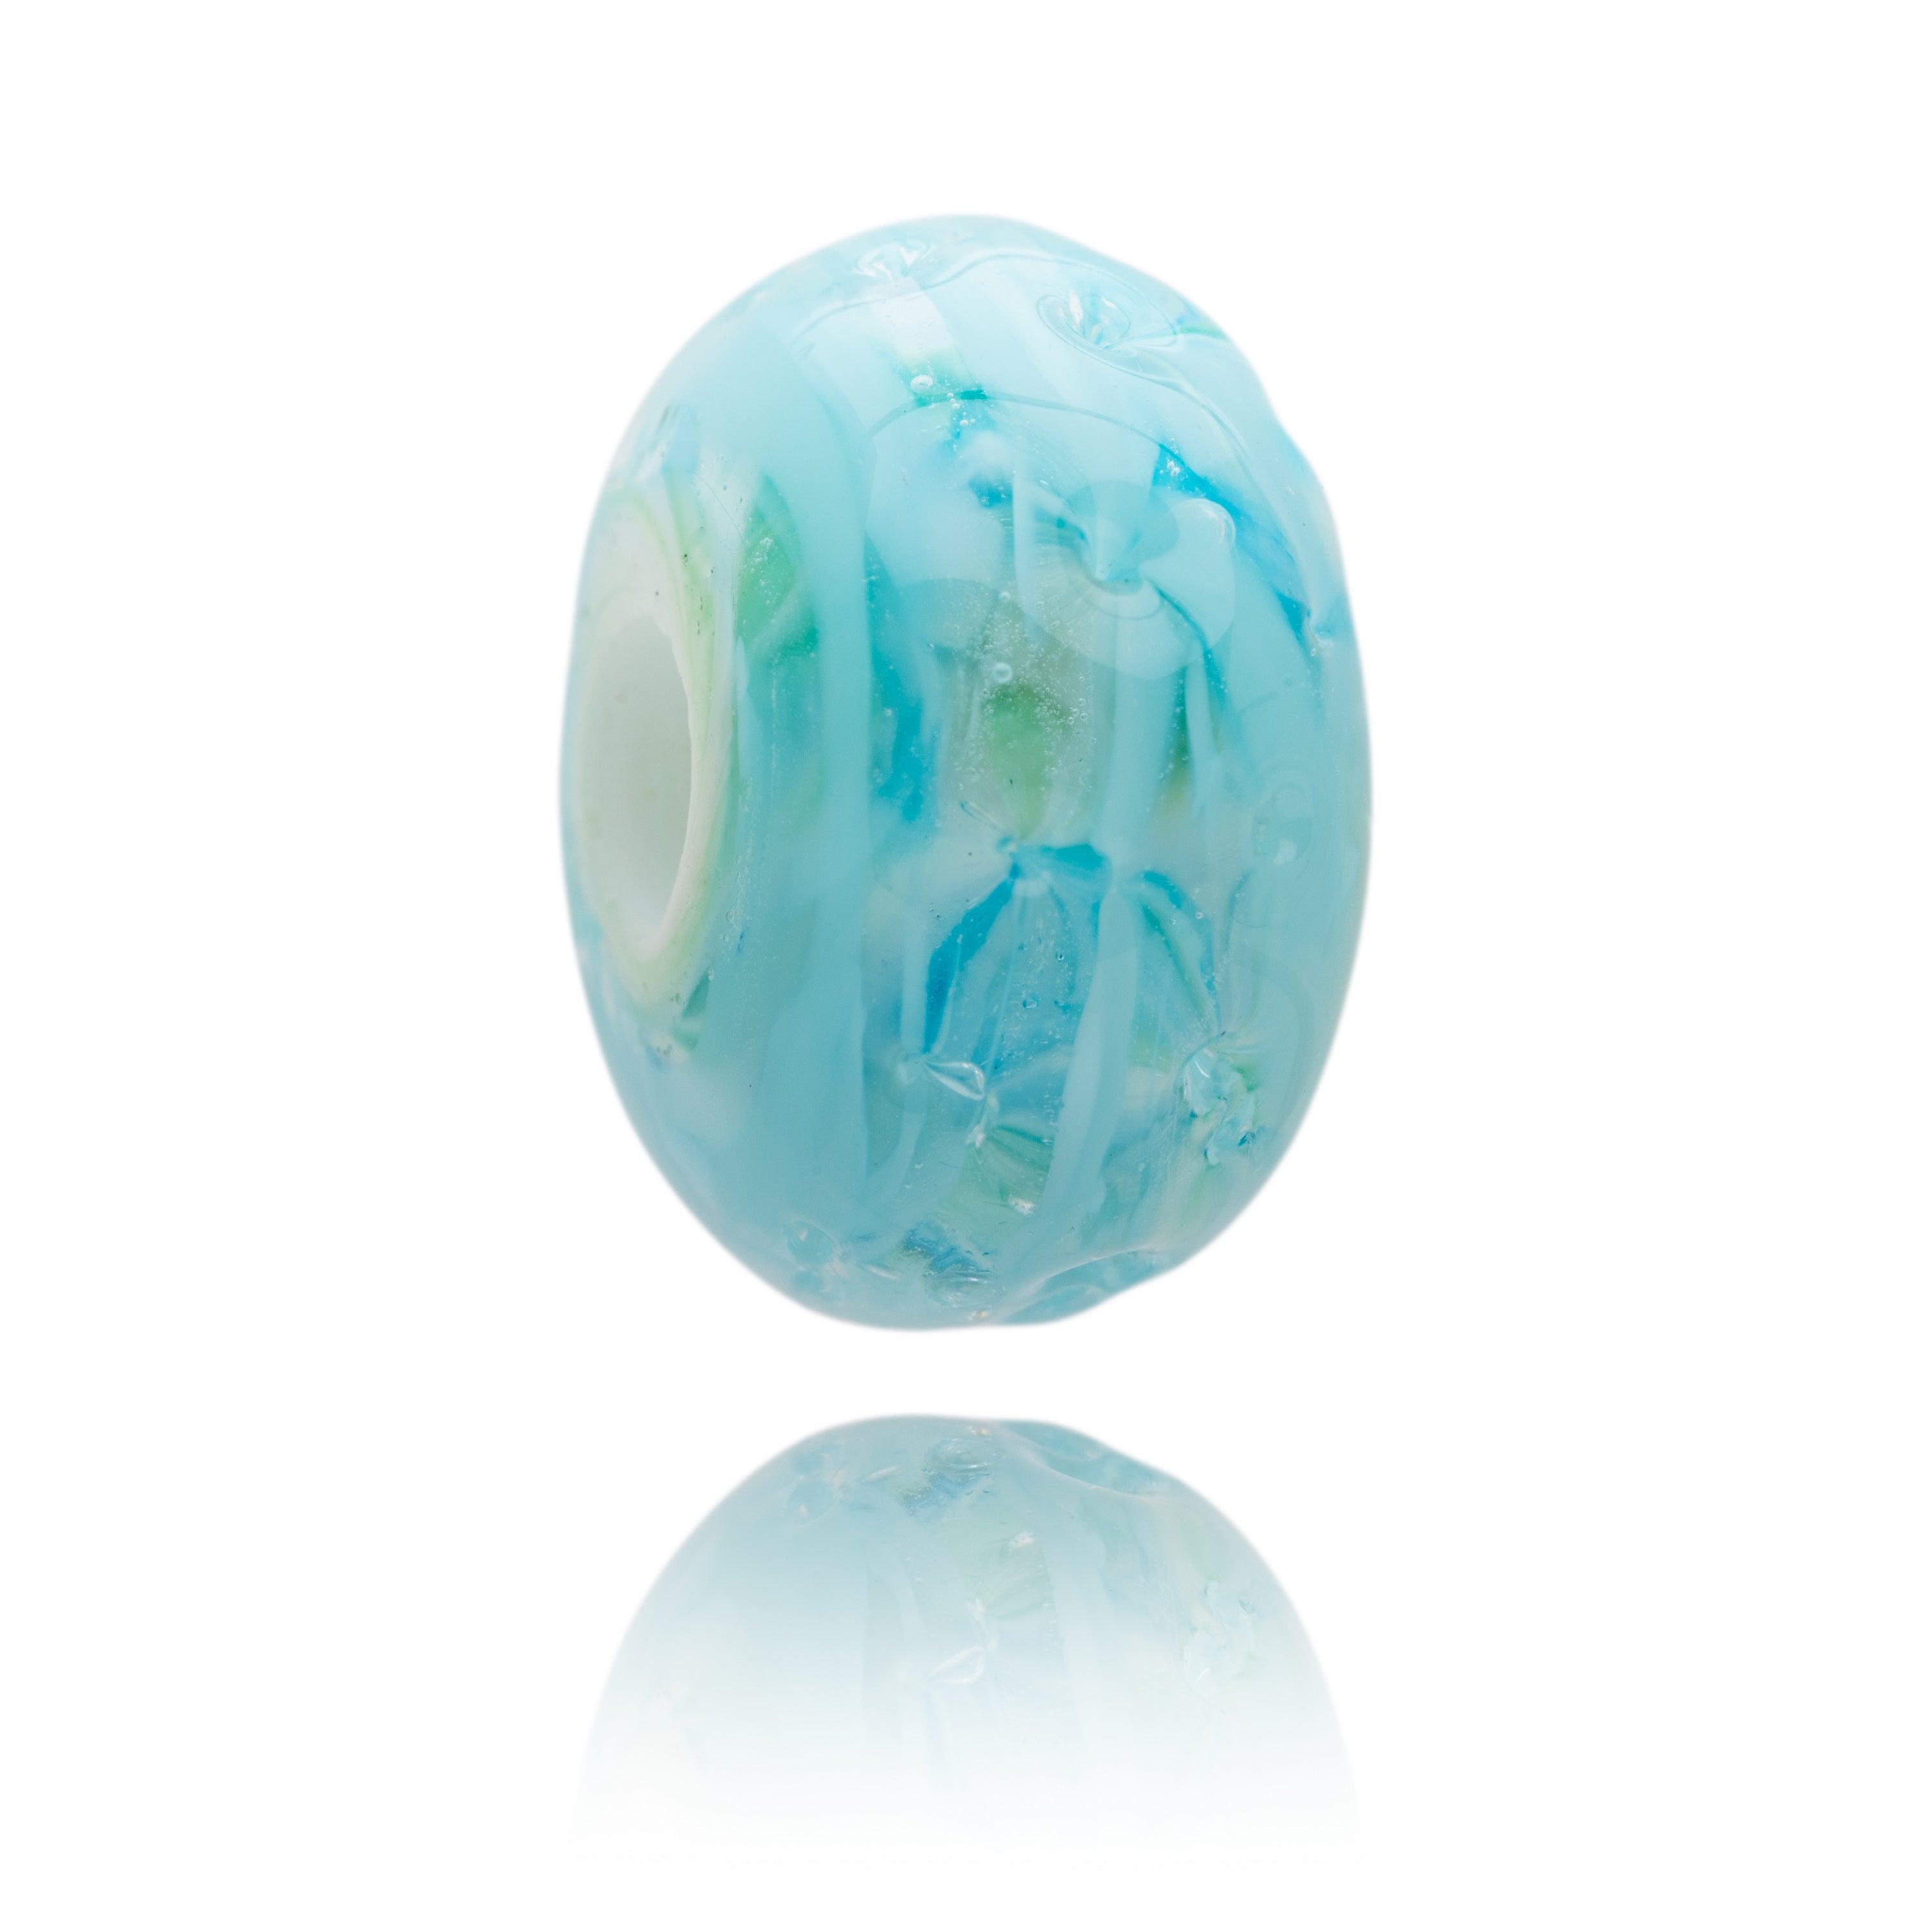 Turquoise glass beach inspired bead for Maenporth in Cornwall by Nalu Beads.